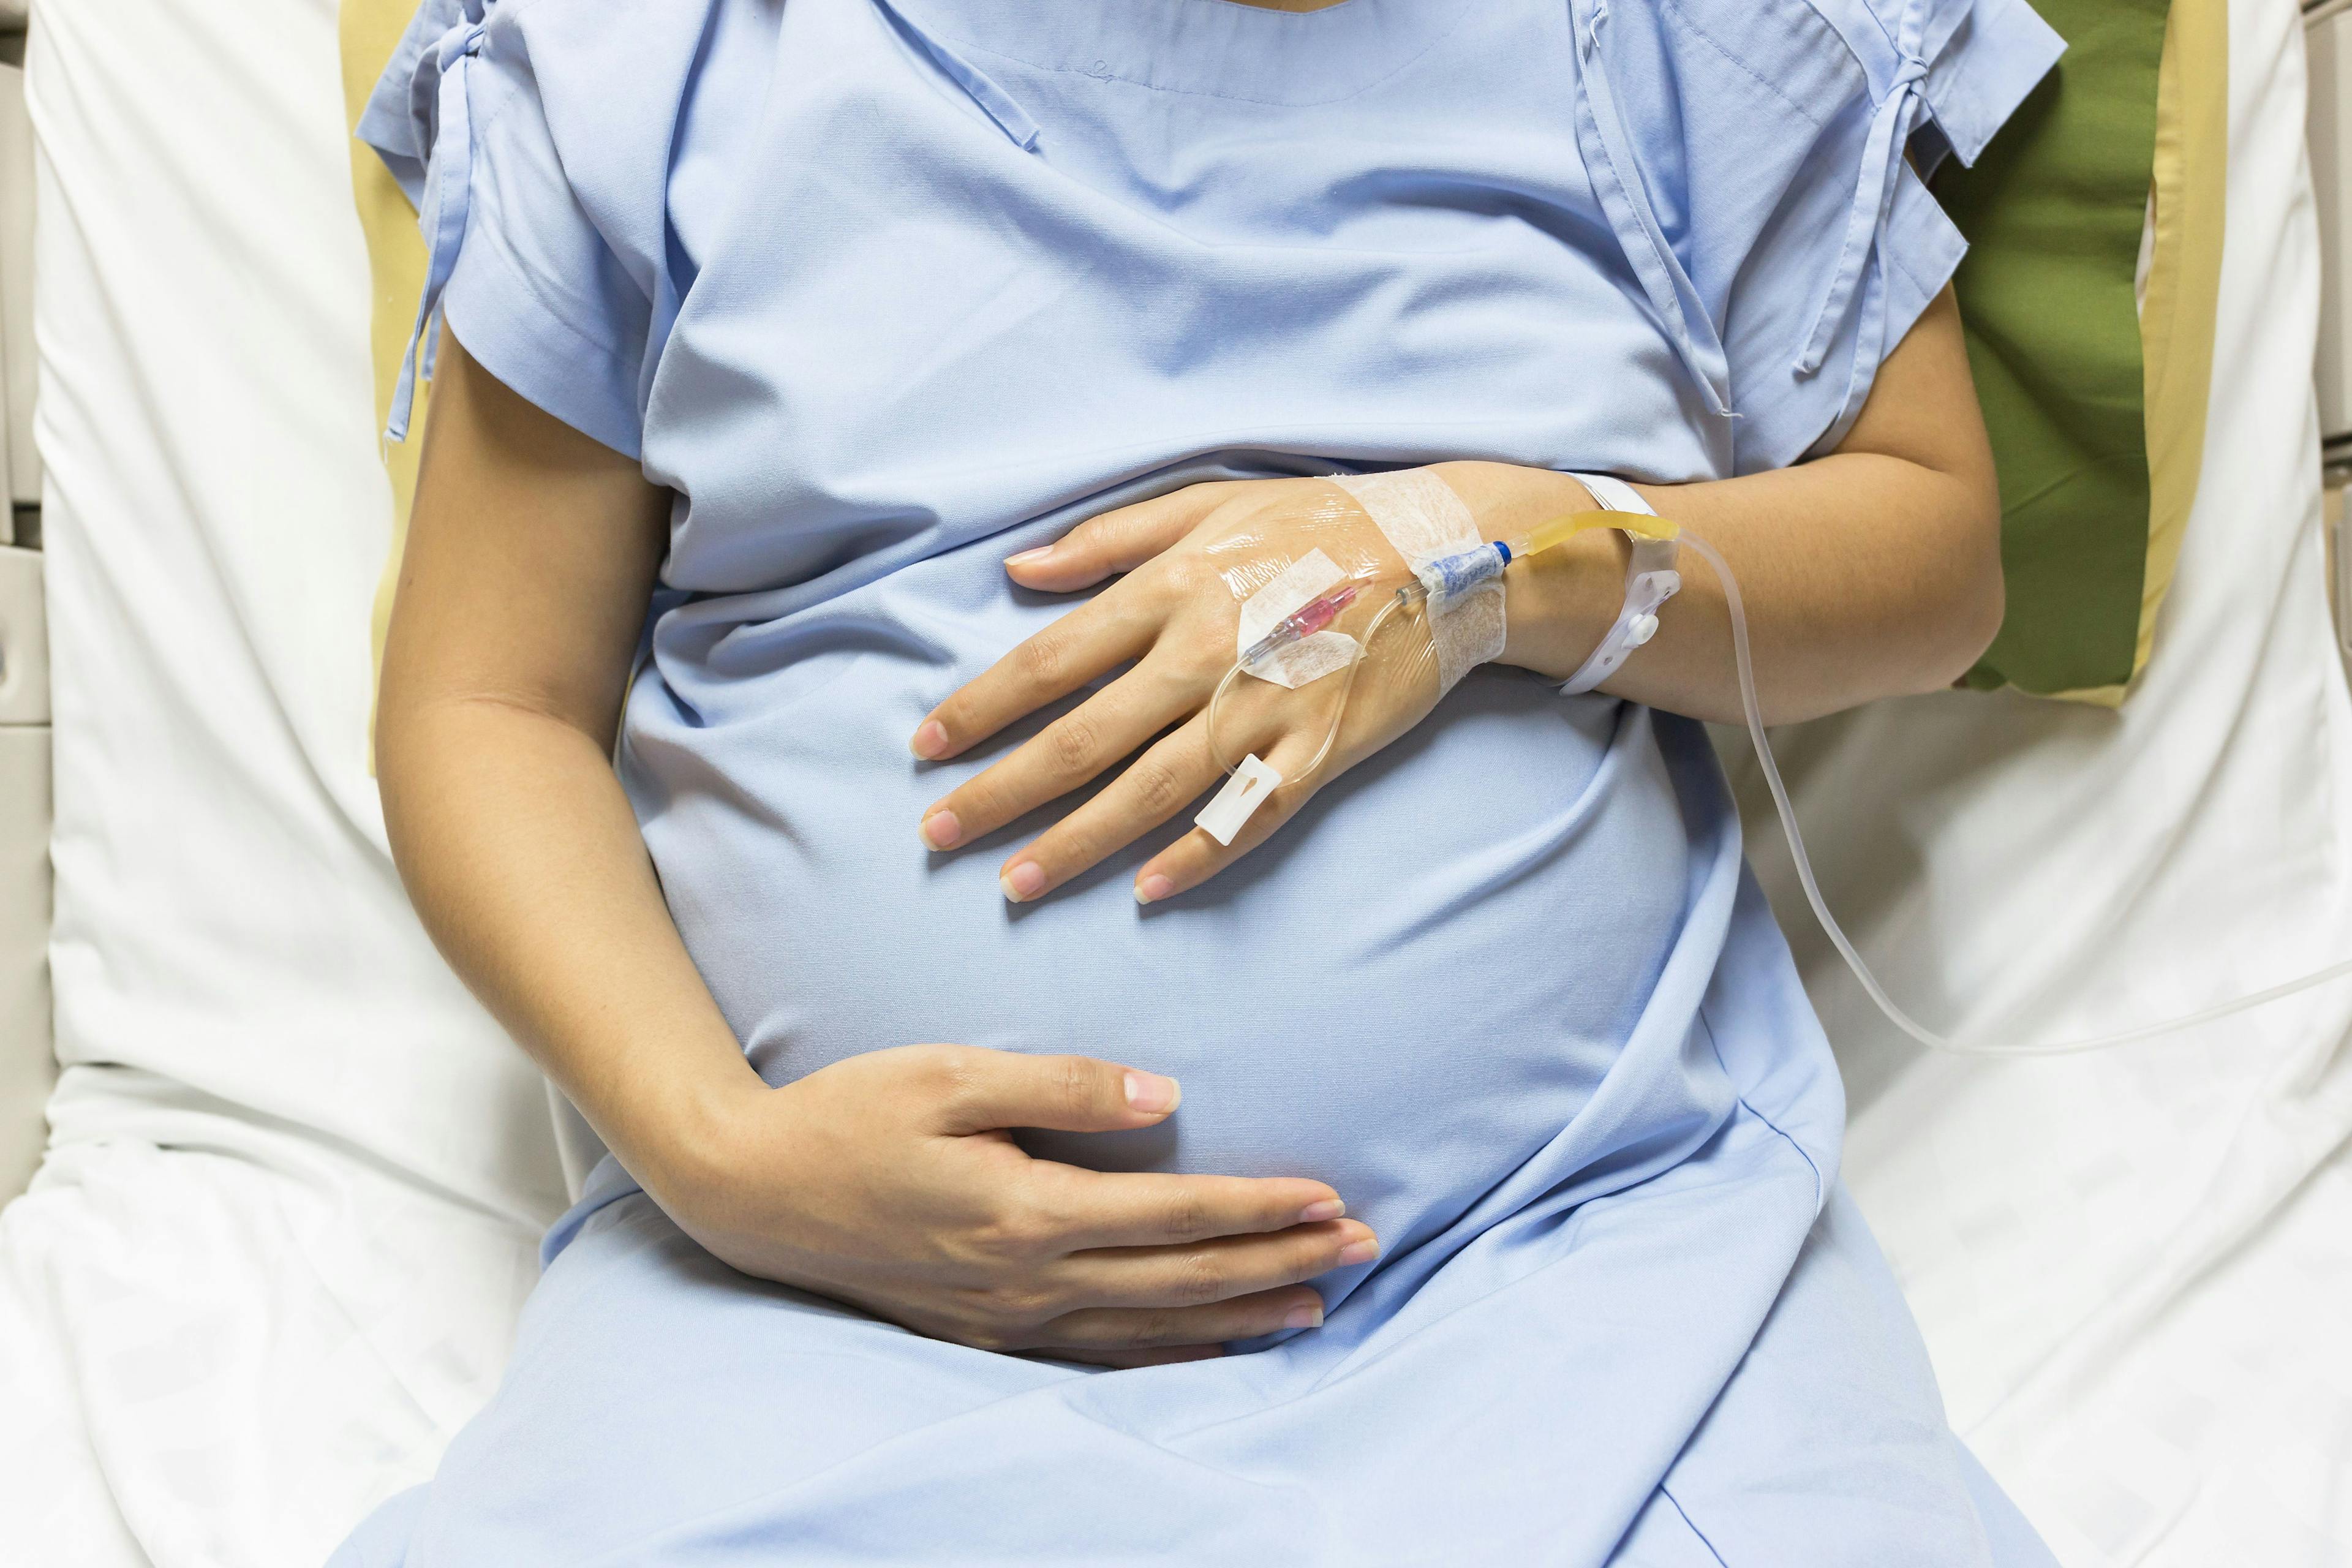 Prepregnancy Cardiovascular Risk Factors Play Role in Risk of Adverse Maternal, Fetal Outcomes